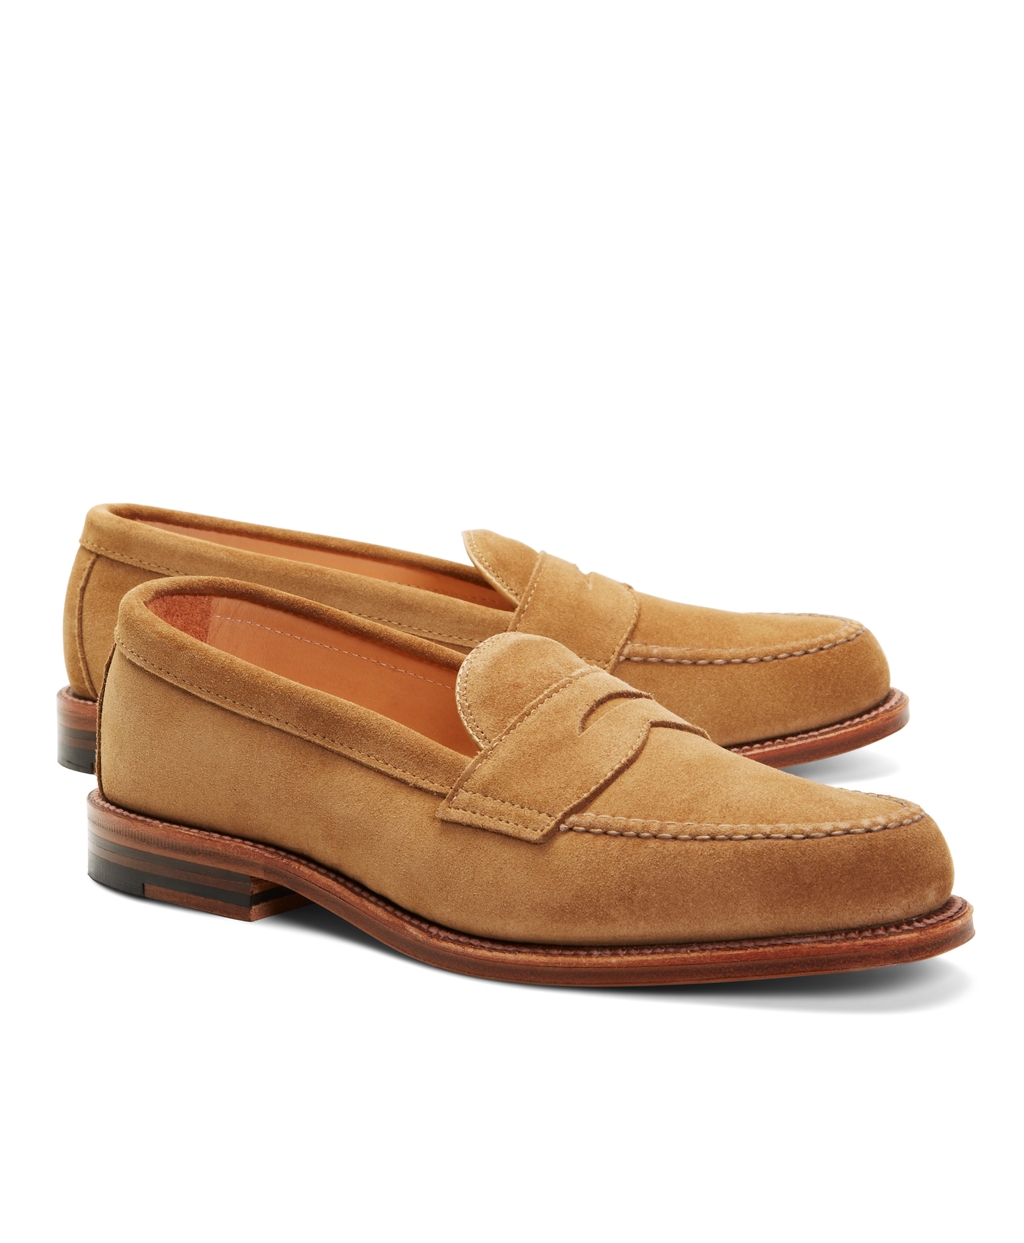 Lyst - Brooks Brothers Handsewn Suede Penny Loafer in Brown for Men